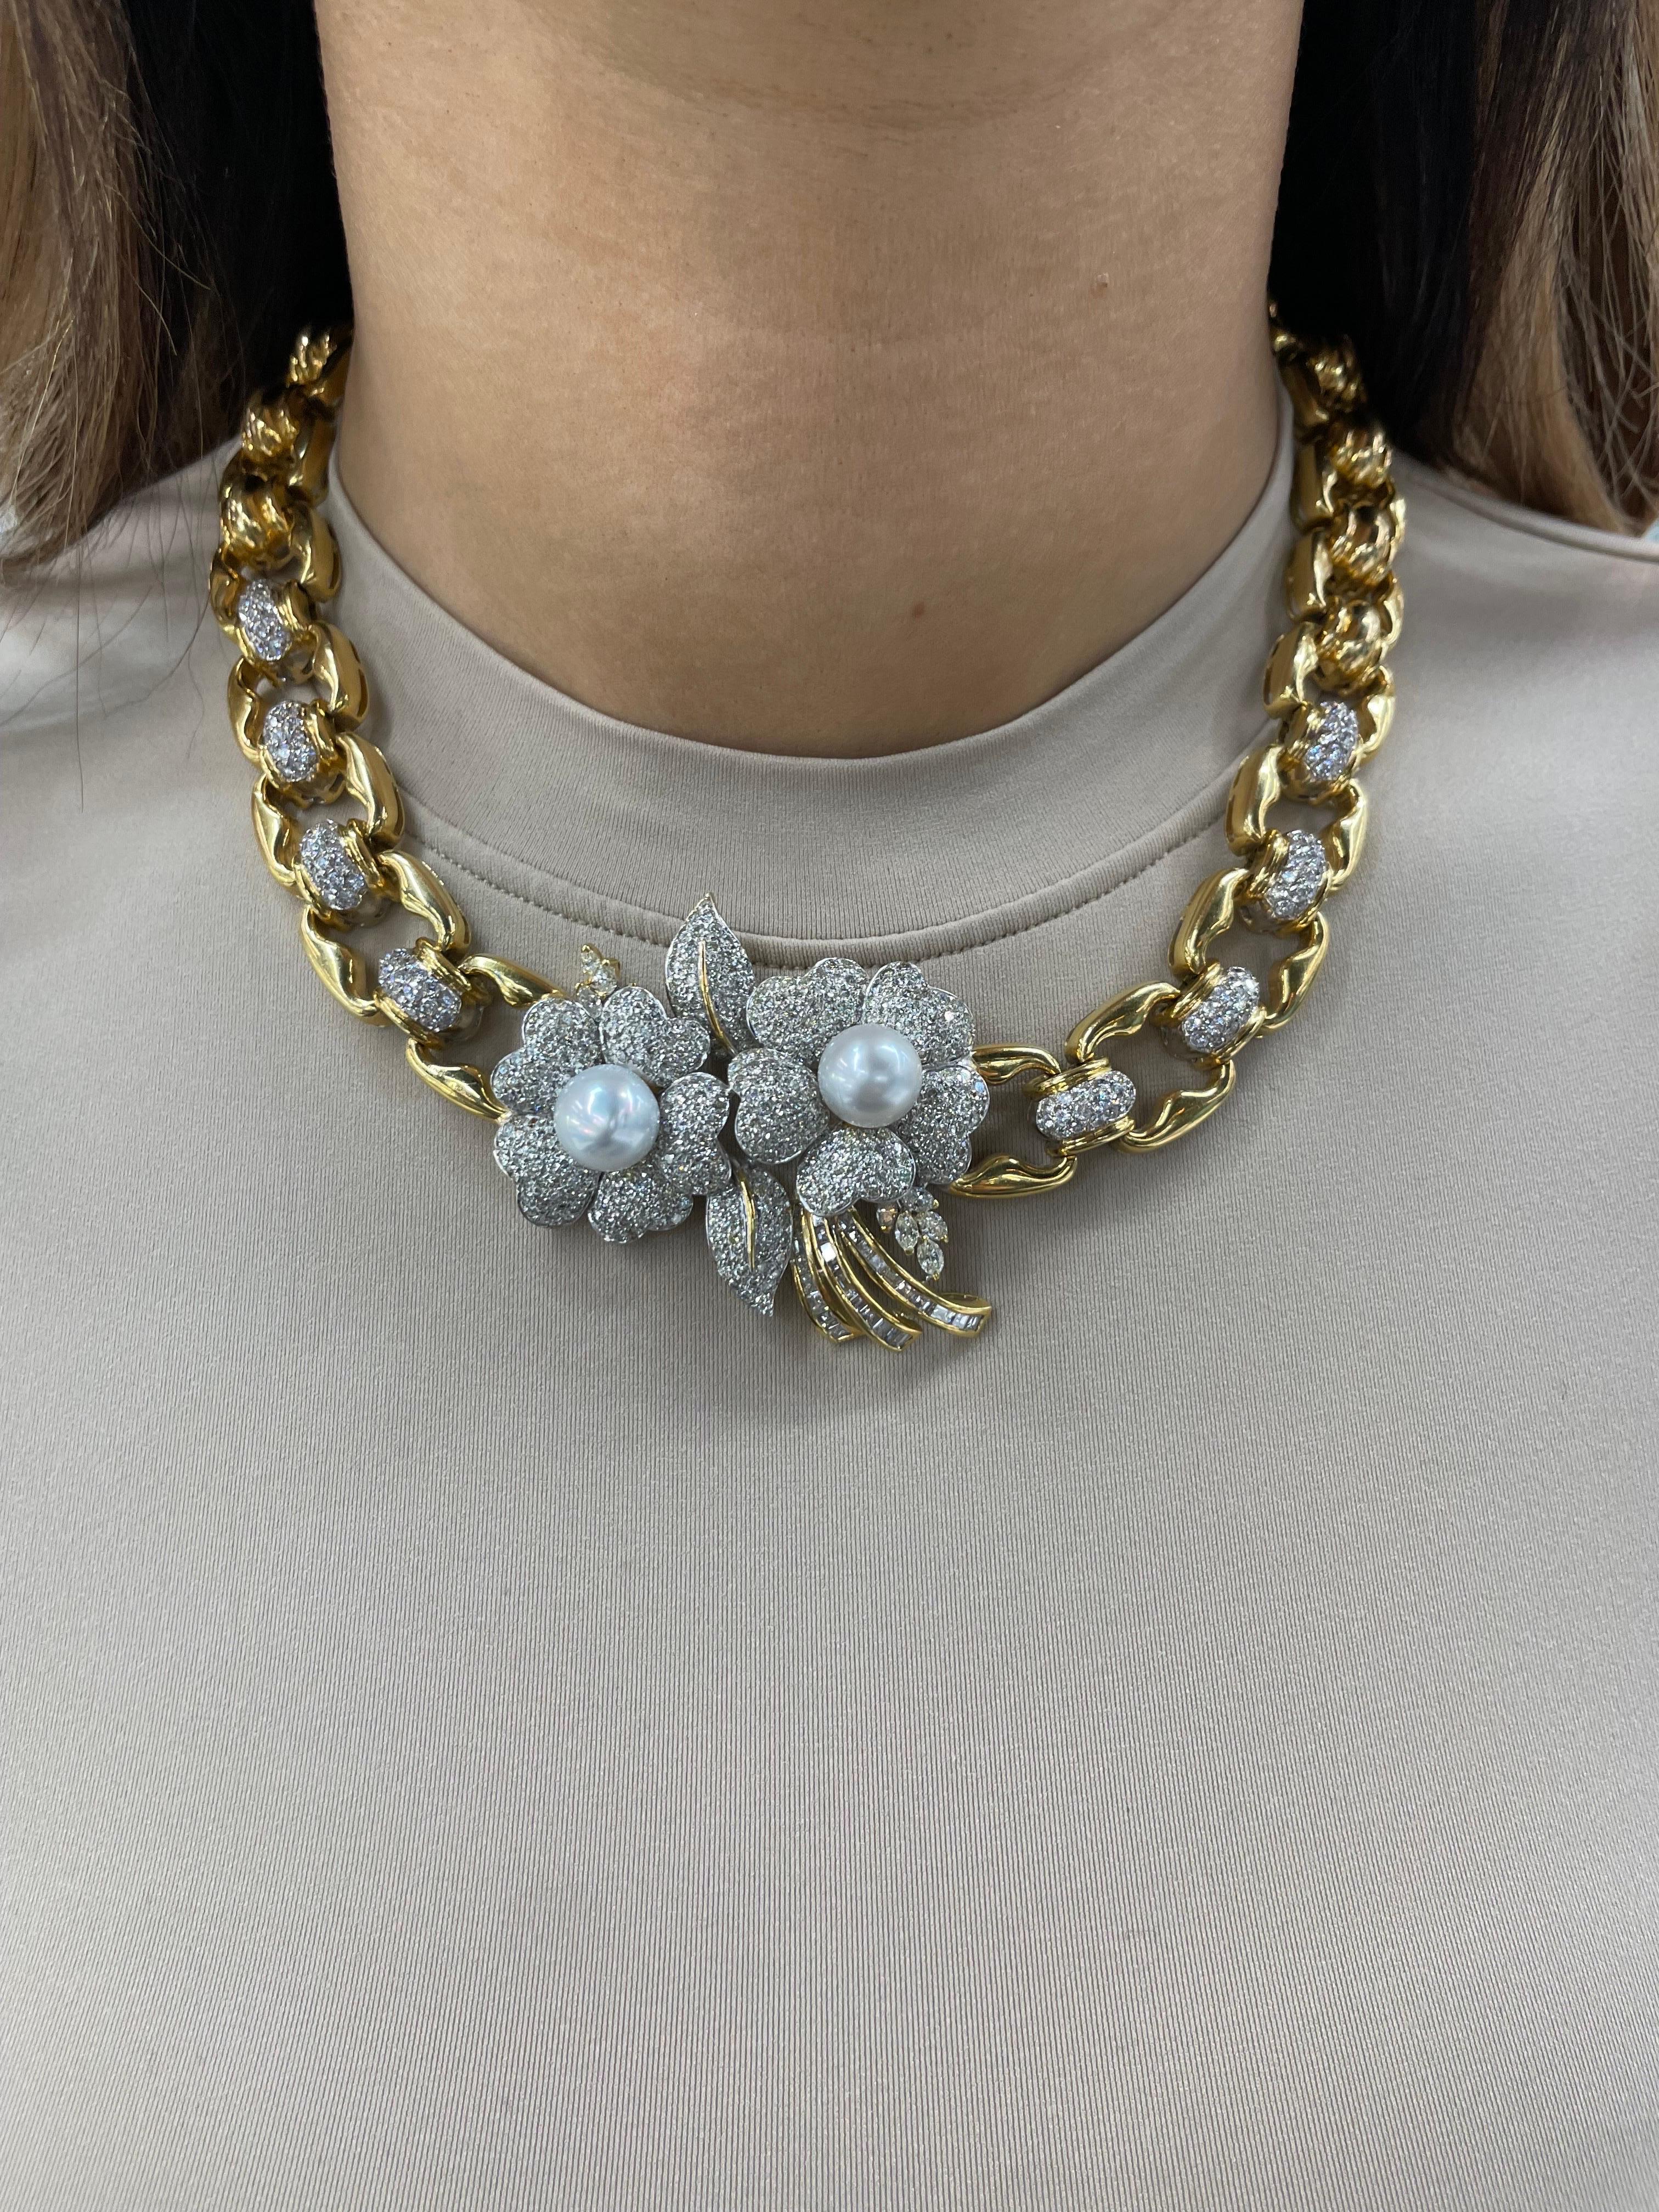 Vintage, 18 Karat Yellow Gold necklace featuring two diamond floral center with White Pearls, 10-11 MM, on a diamond link necklace weighing 155.2 Grams.
Color G-H
Clarity SI